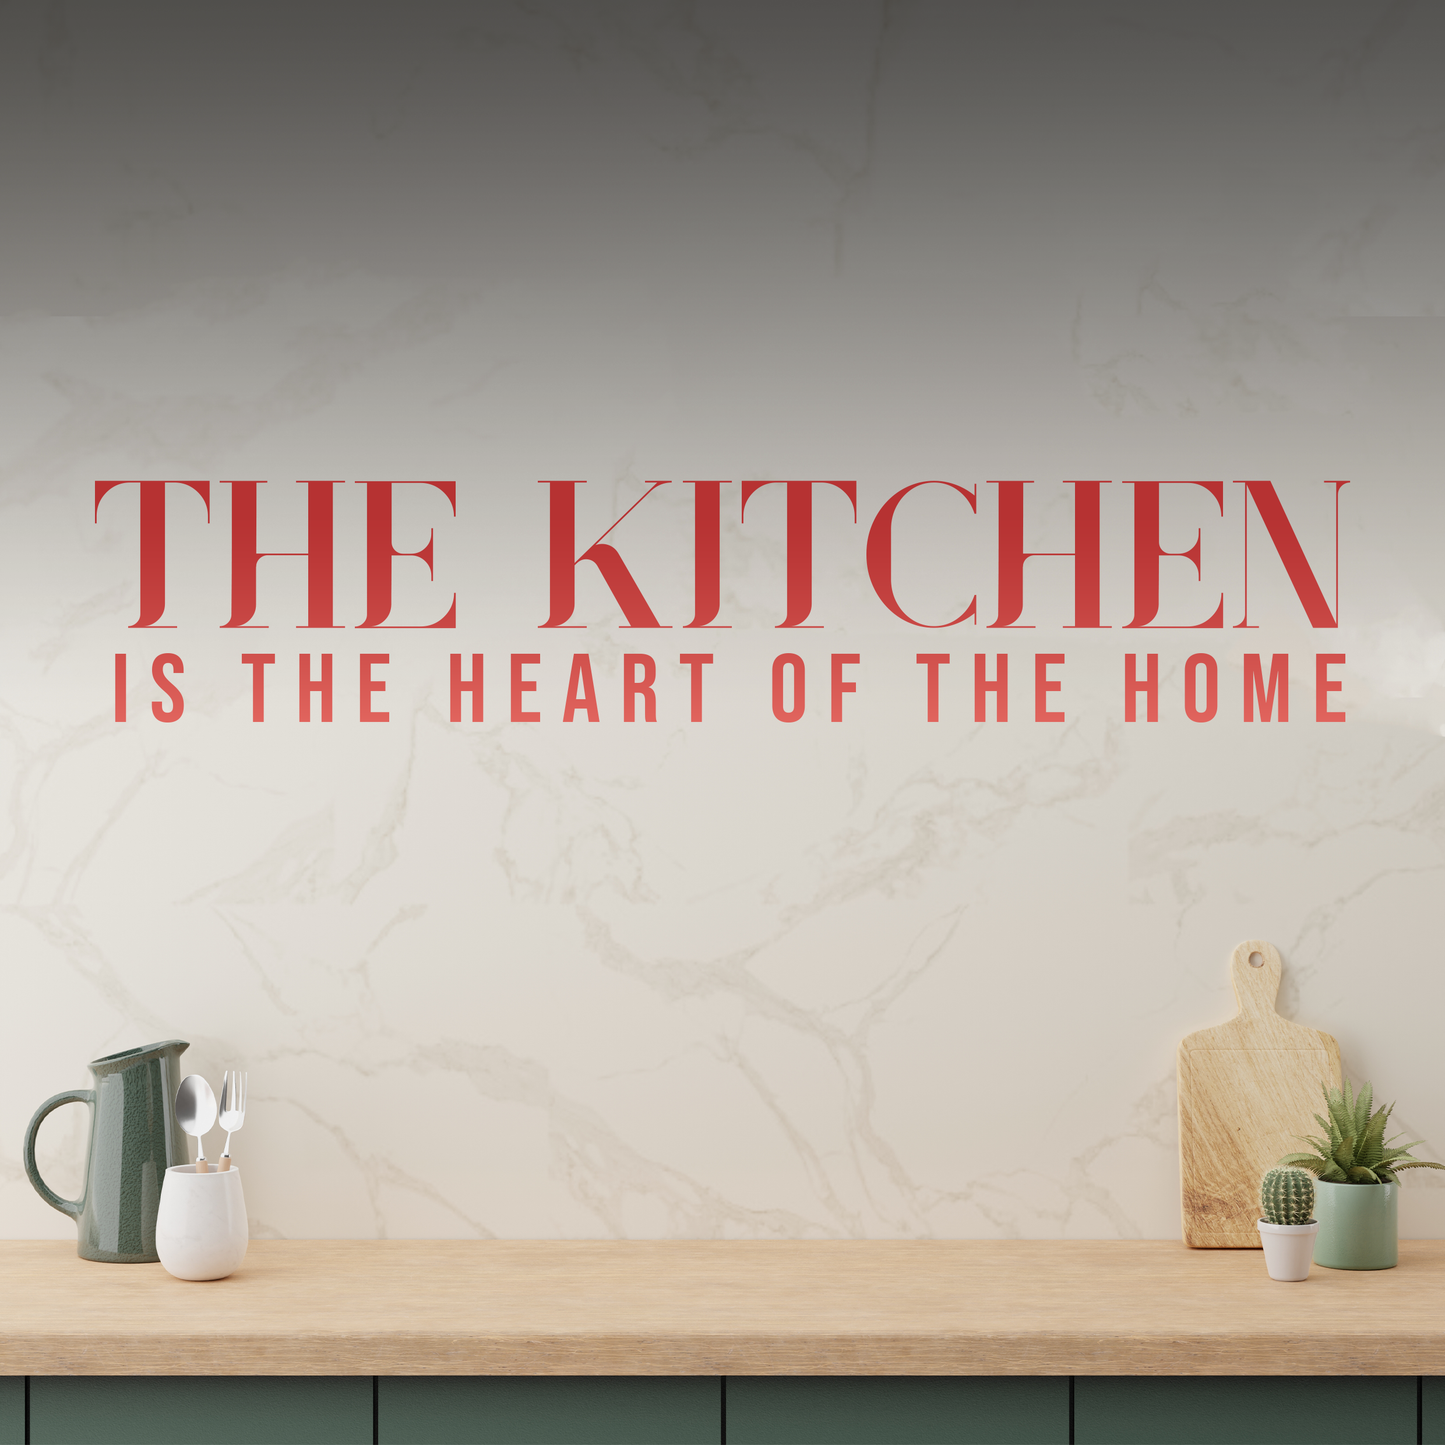 Heart of the Home Kitchen Wall Sticker Decal